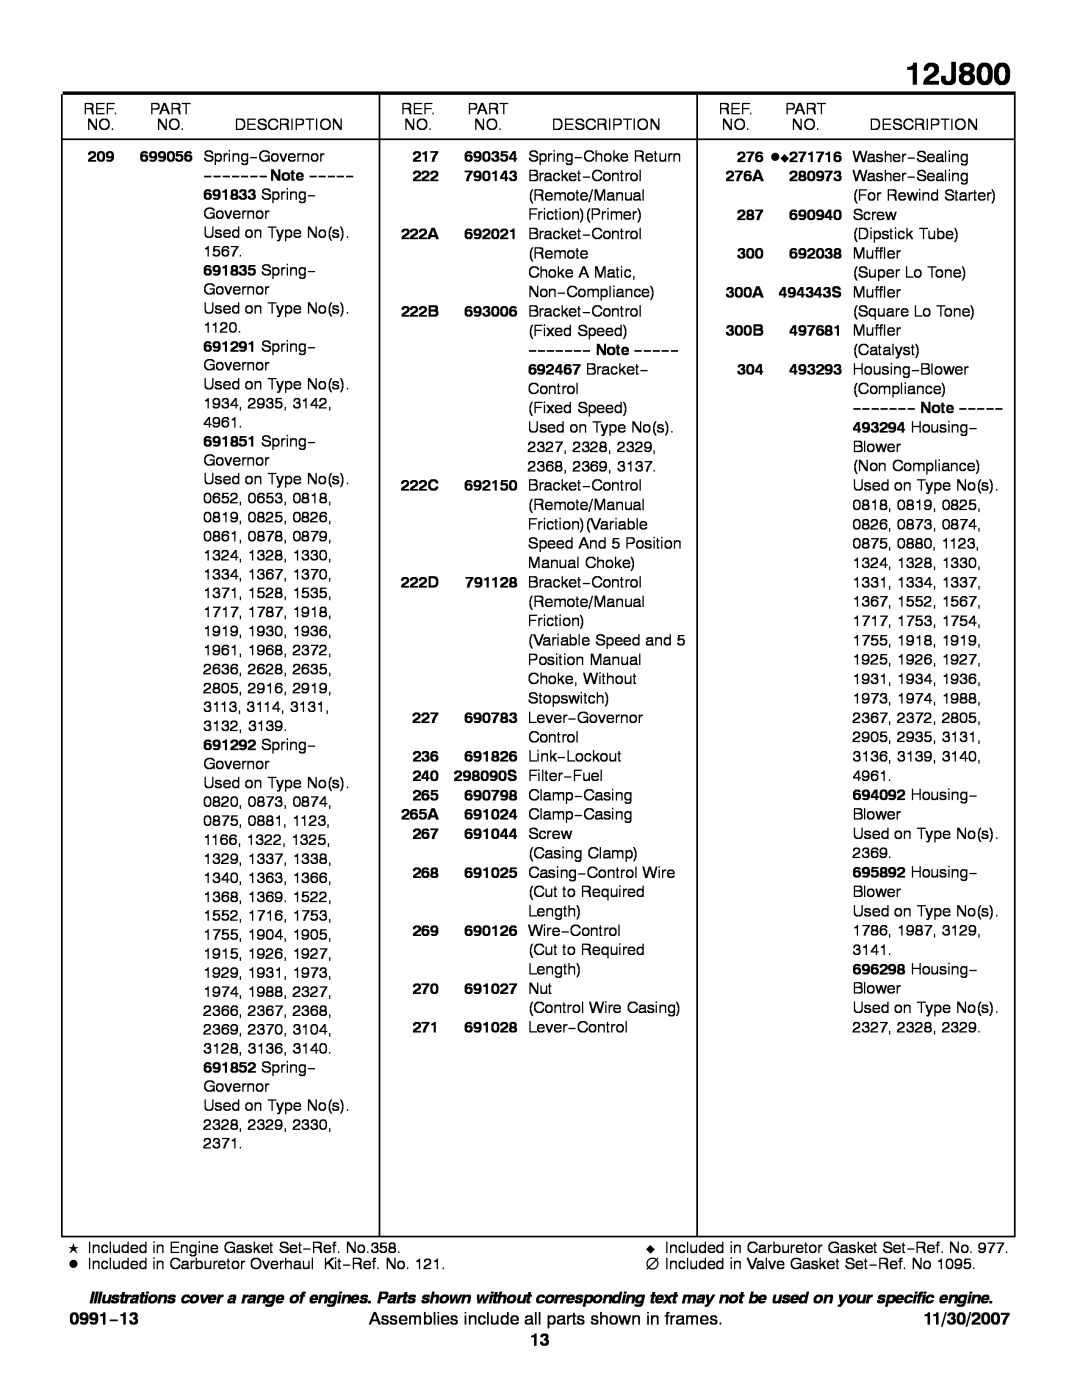 Briggs & Stratton 12J800 service manual 0991−13, Assemblies include all parts shown in frames, 11/30/2007 